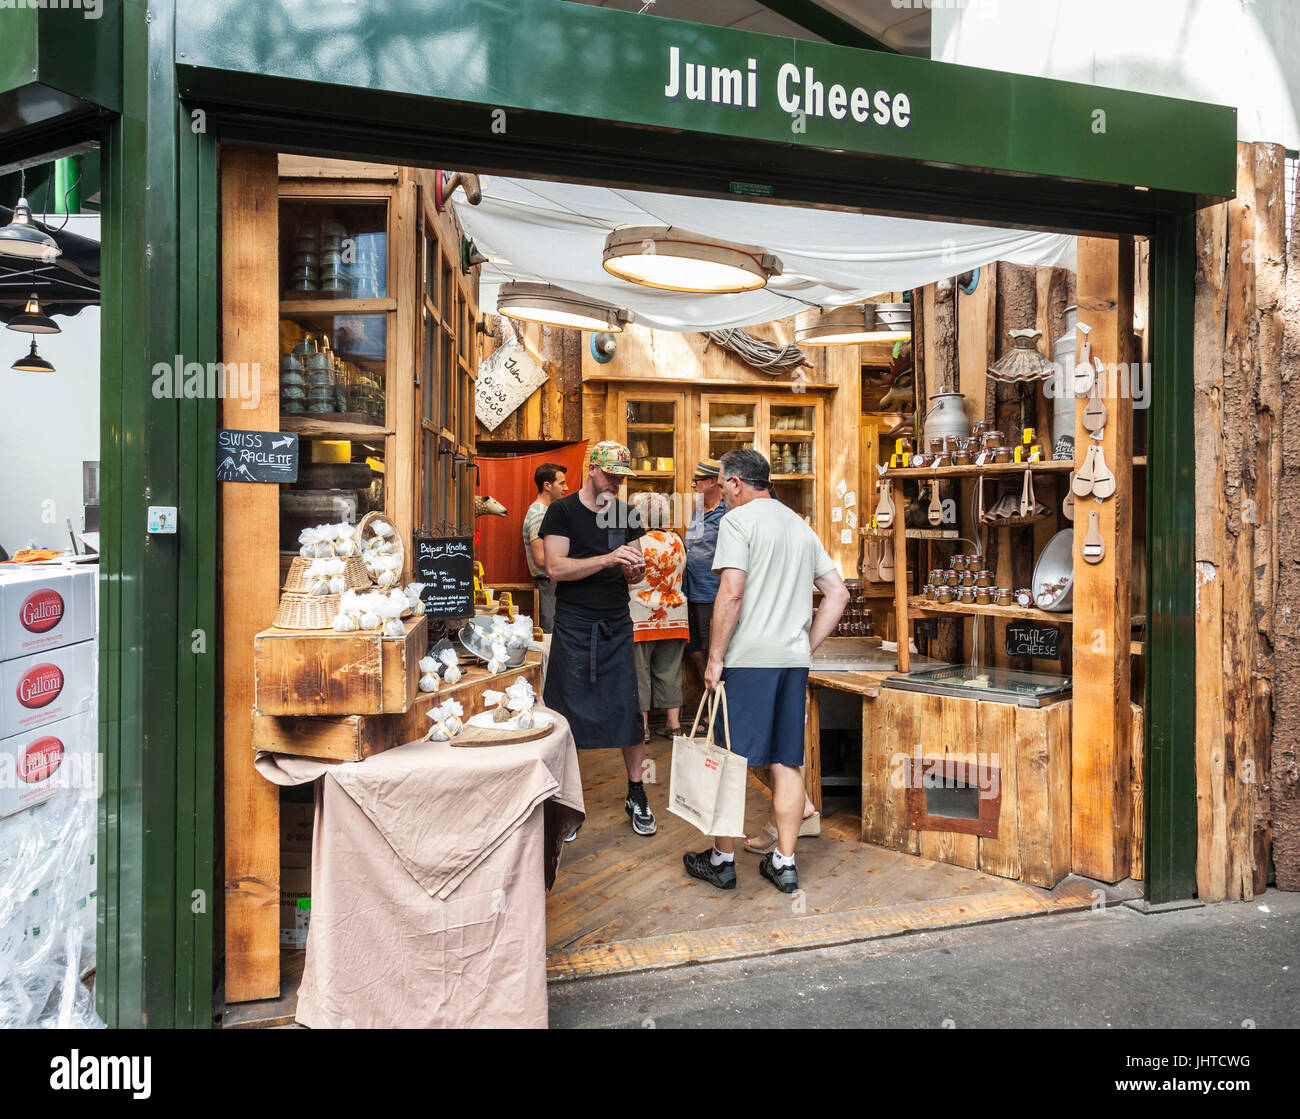 Jumi Cheese, a specialist cheese stall in Borough Market, the historic specialist food market in Southwark, central London, England, UK Stock Photo